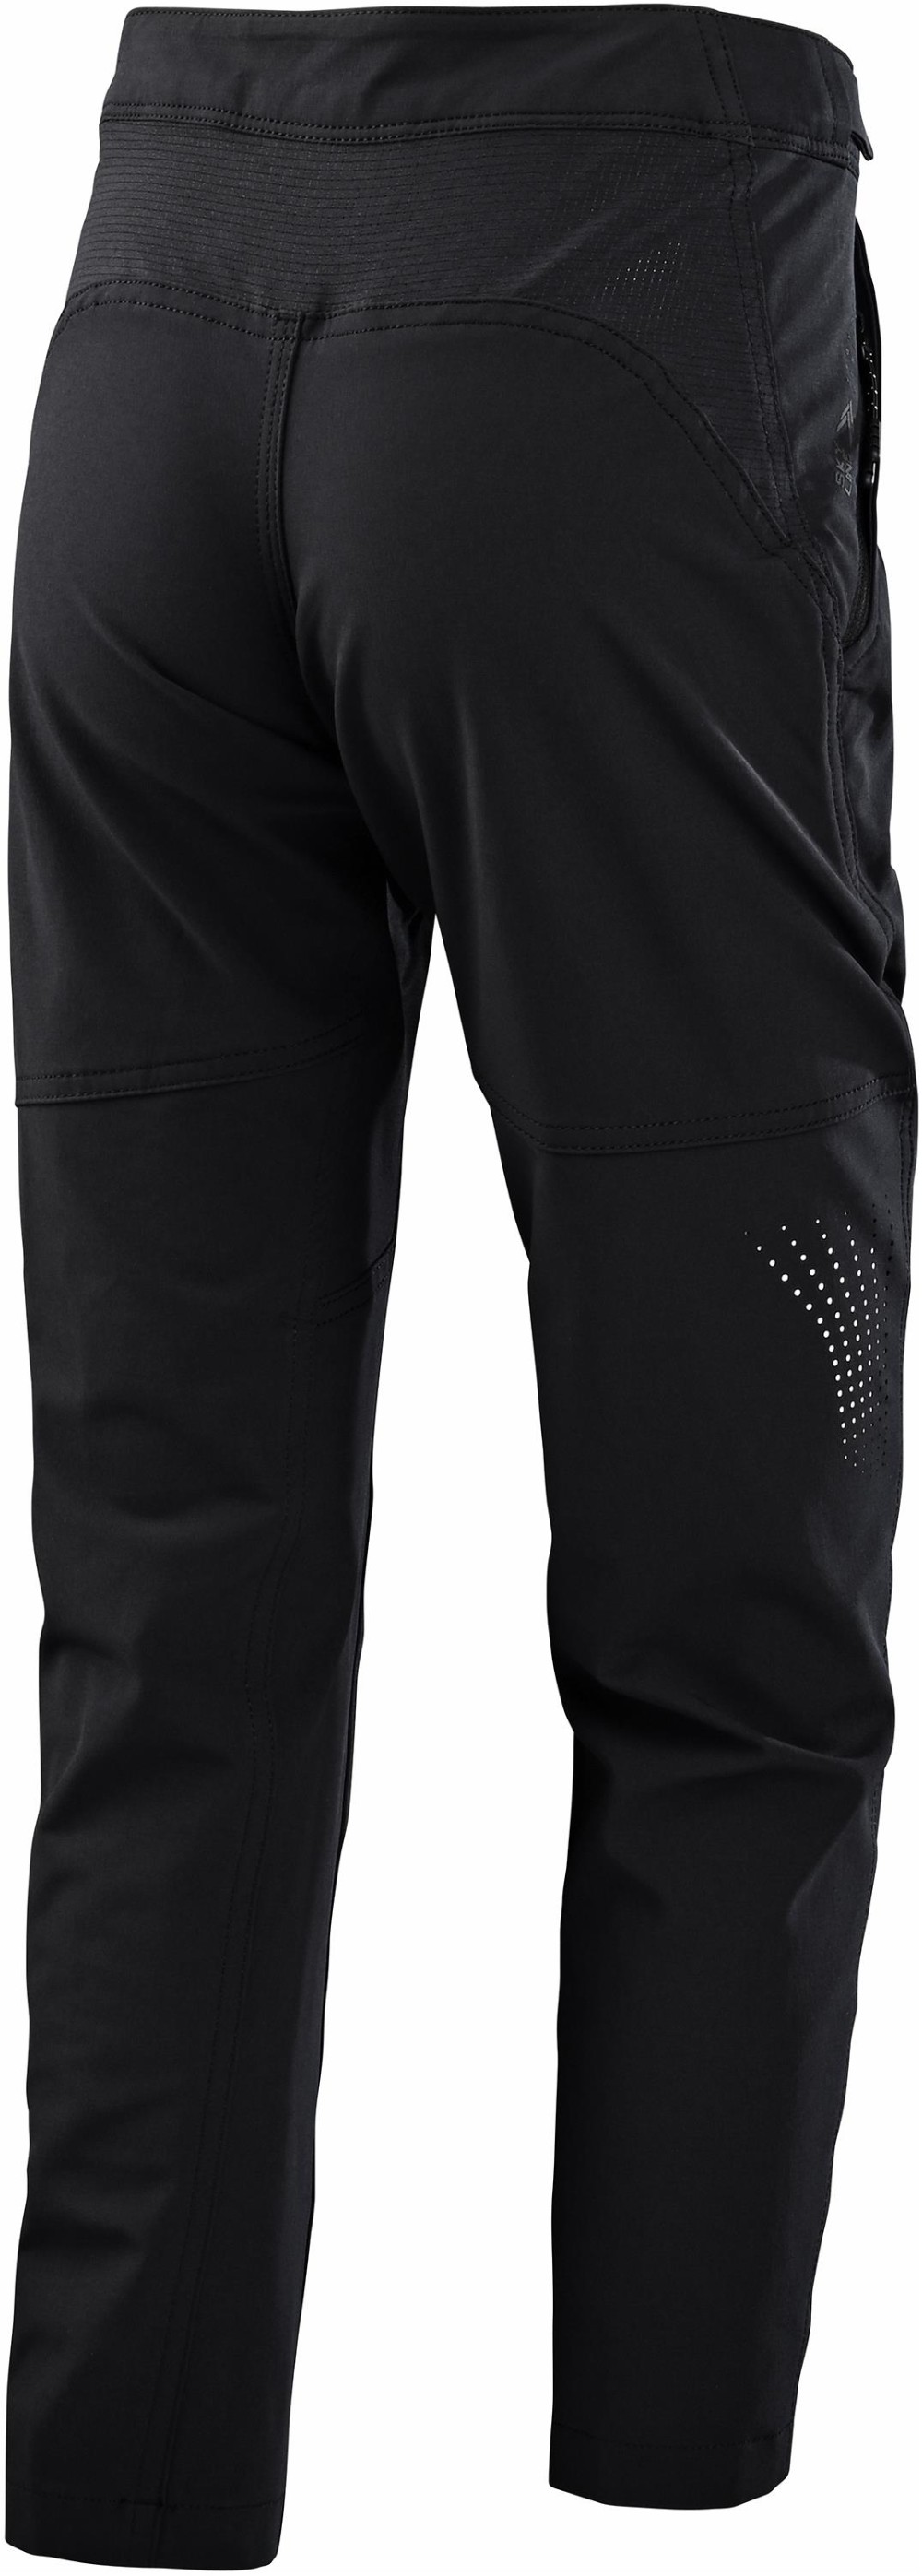 Skyline Youth MTB Cycling Trousers image 1